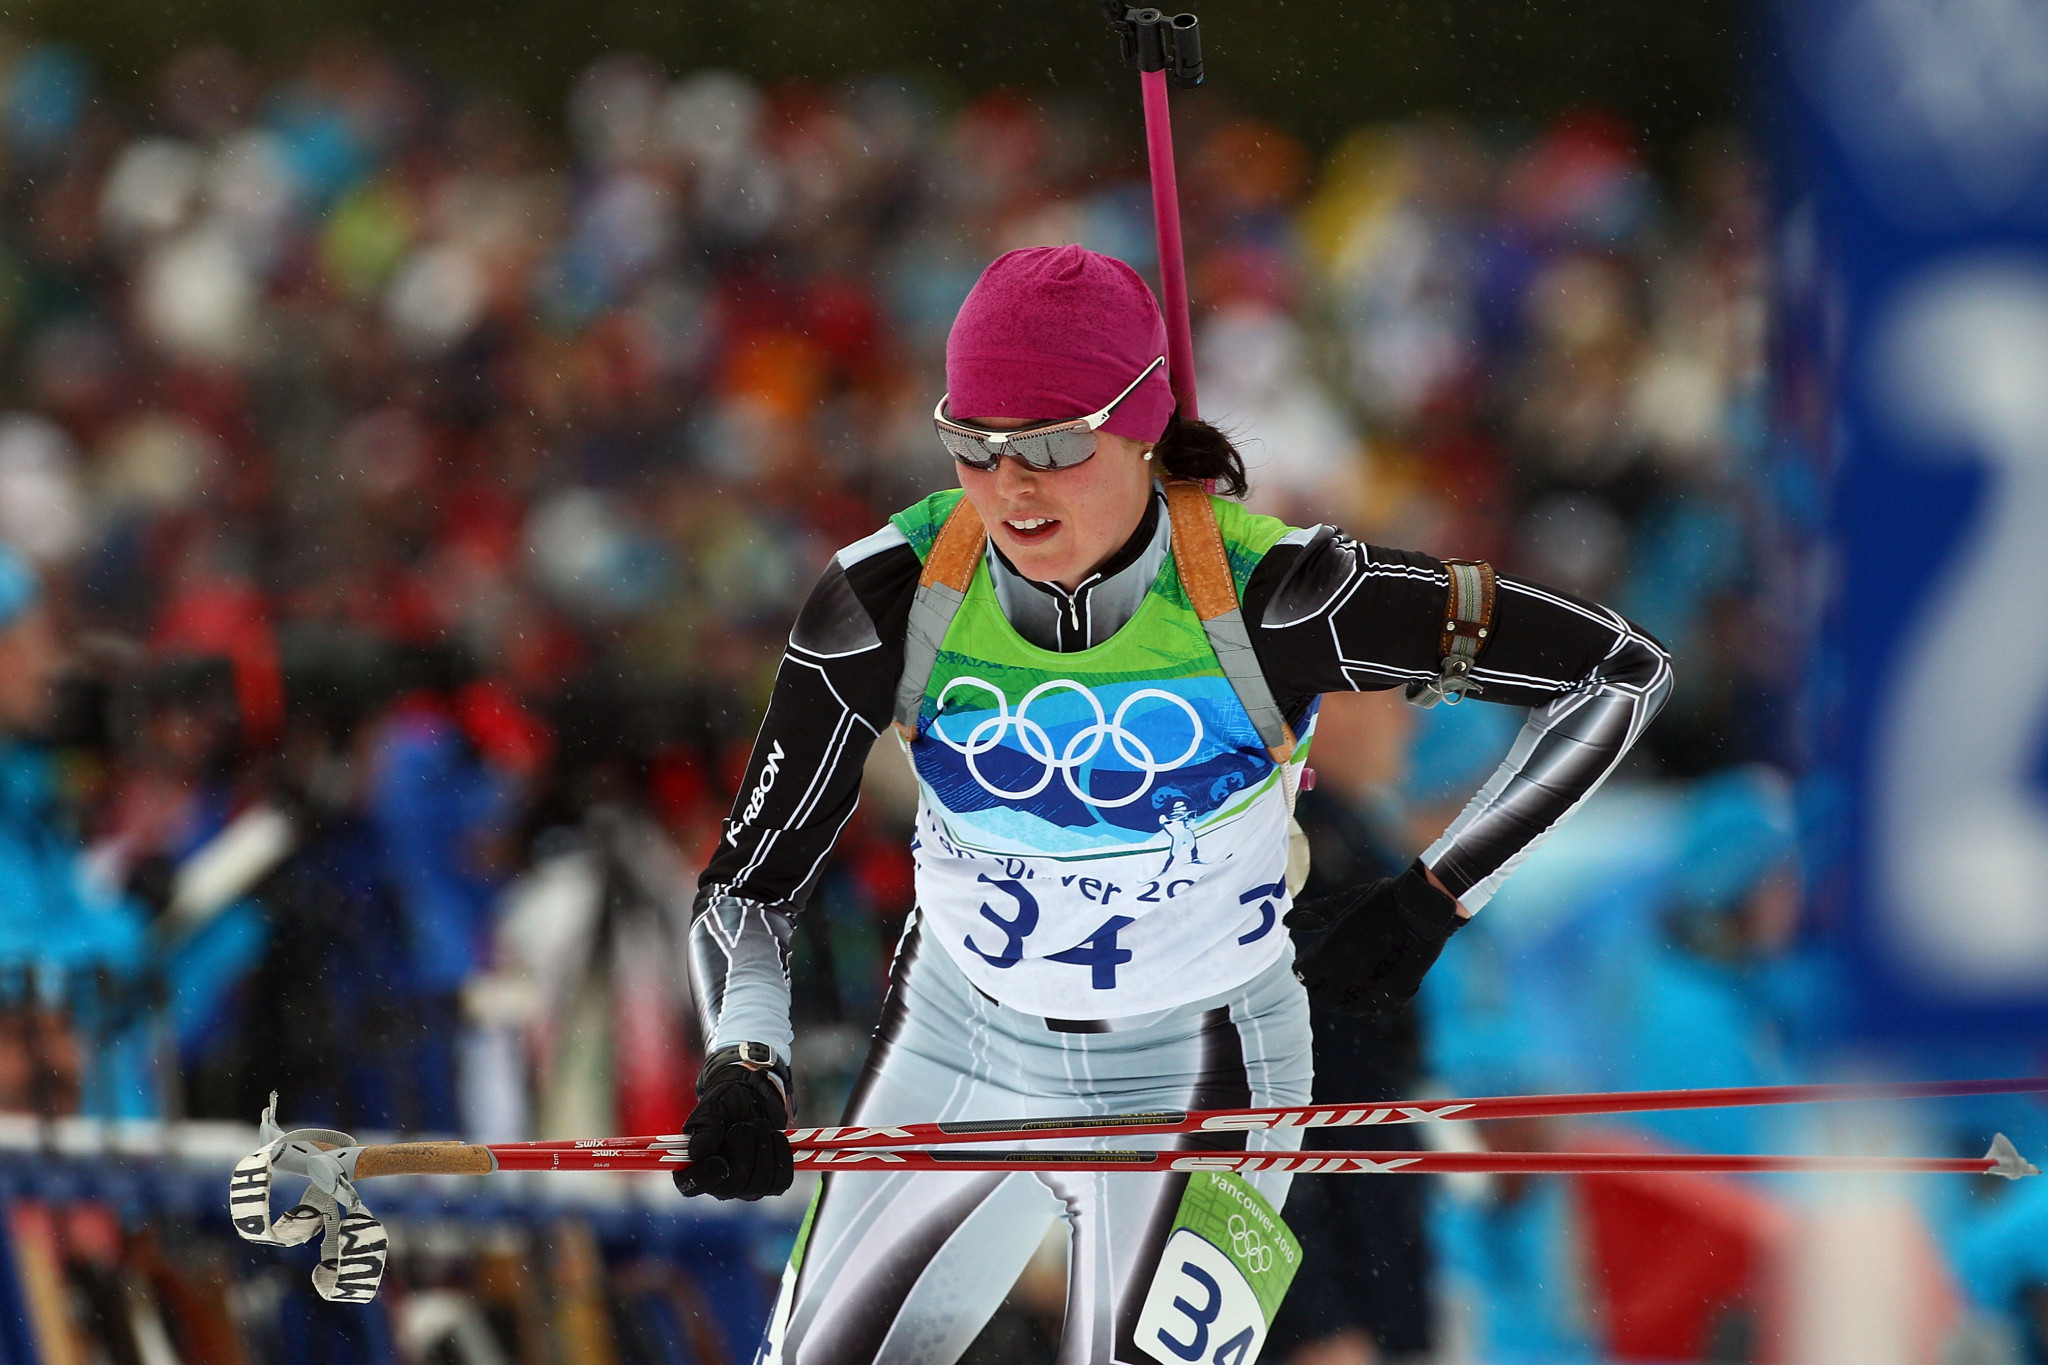 Sarah Murphy represented New Zealand at the Vancouver 2010 Winter Olympics ©Getty Images